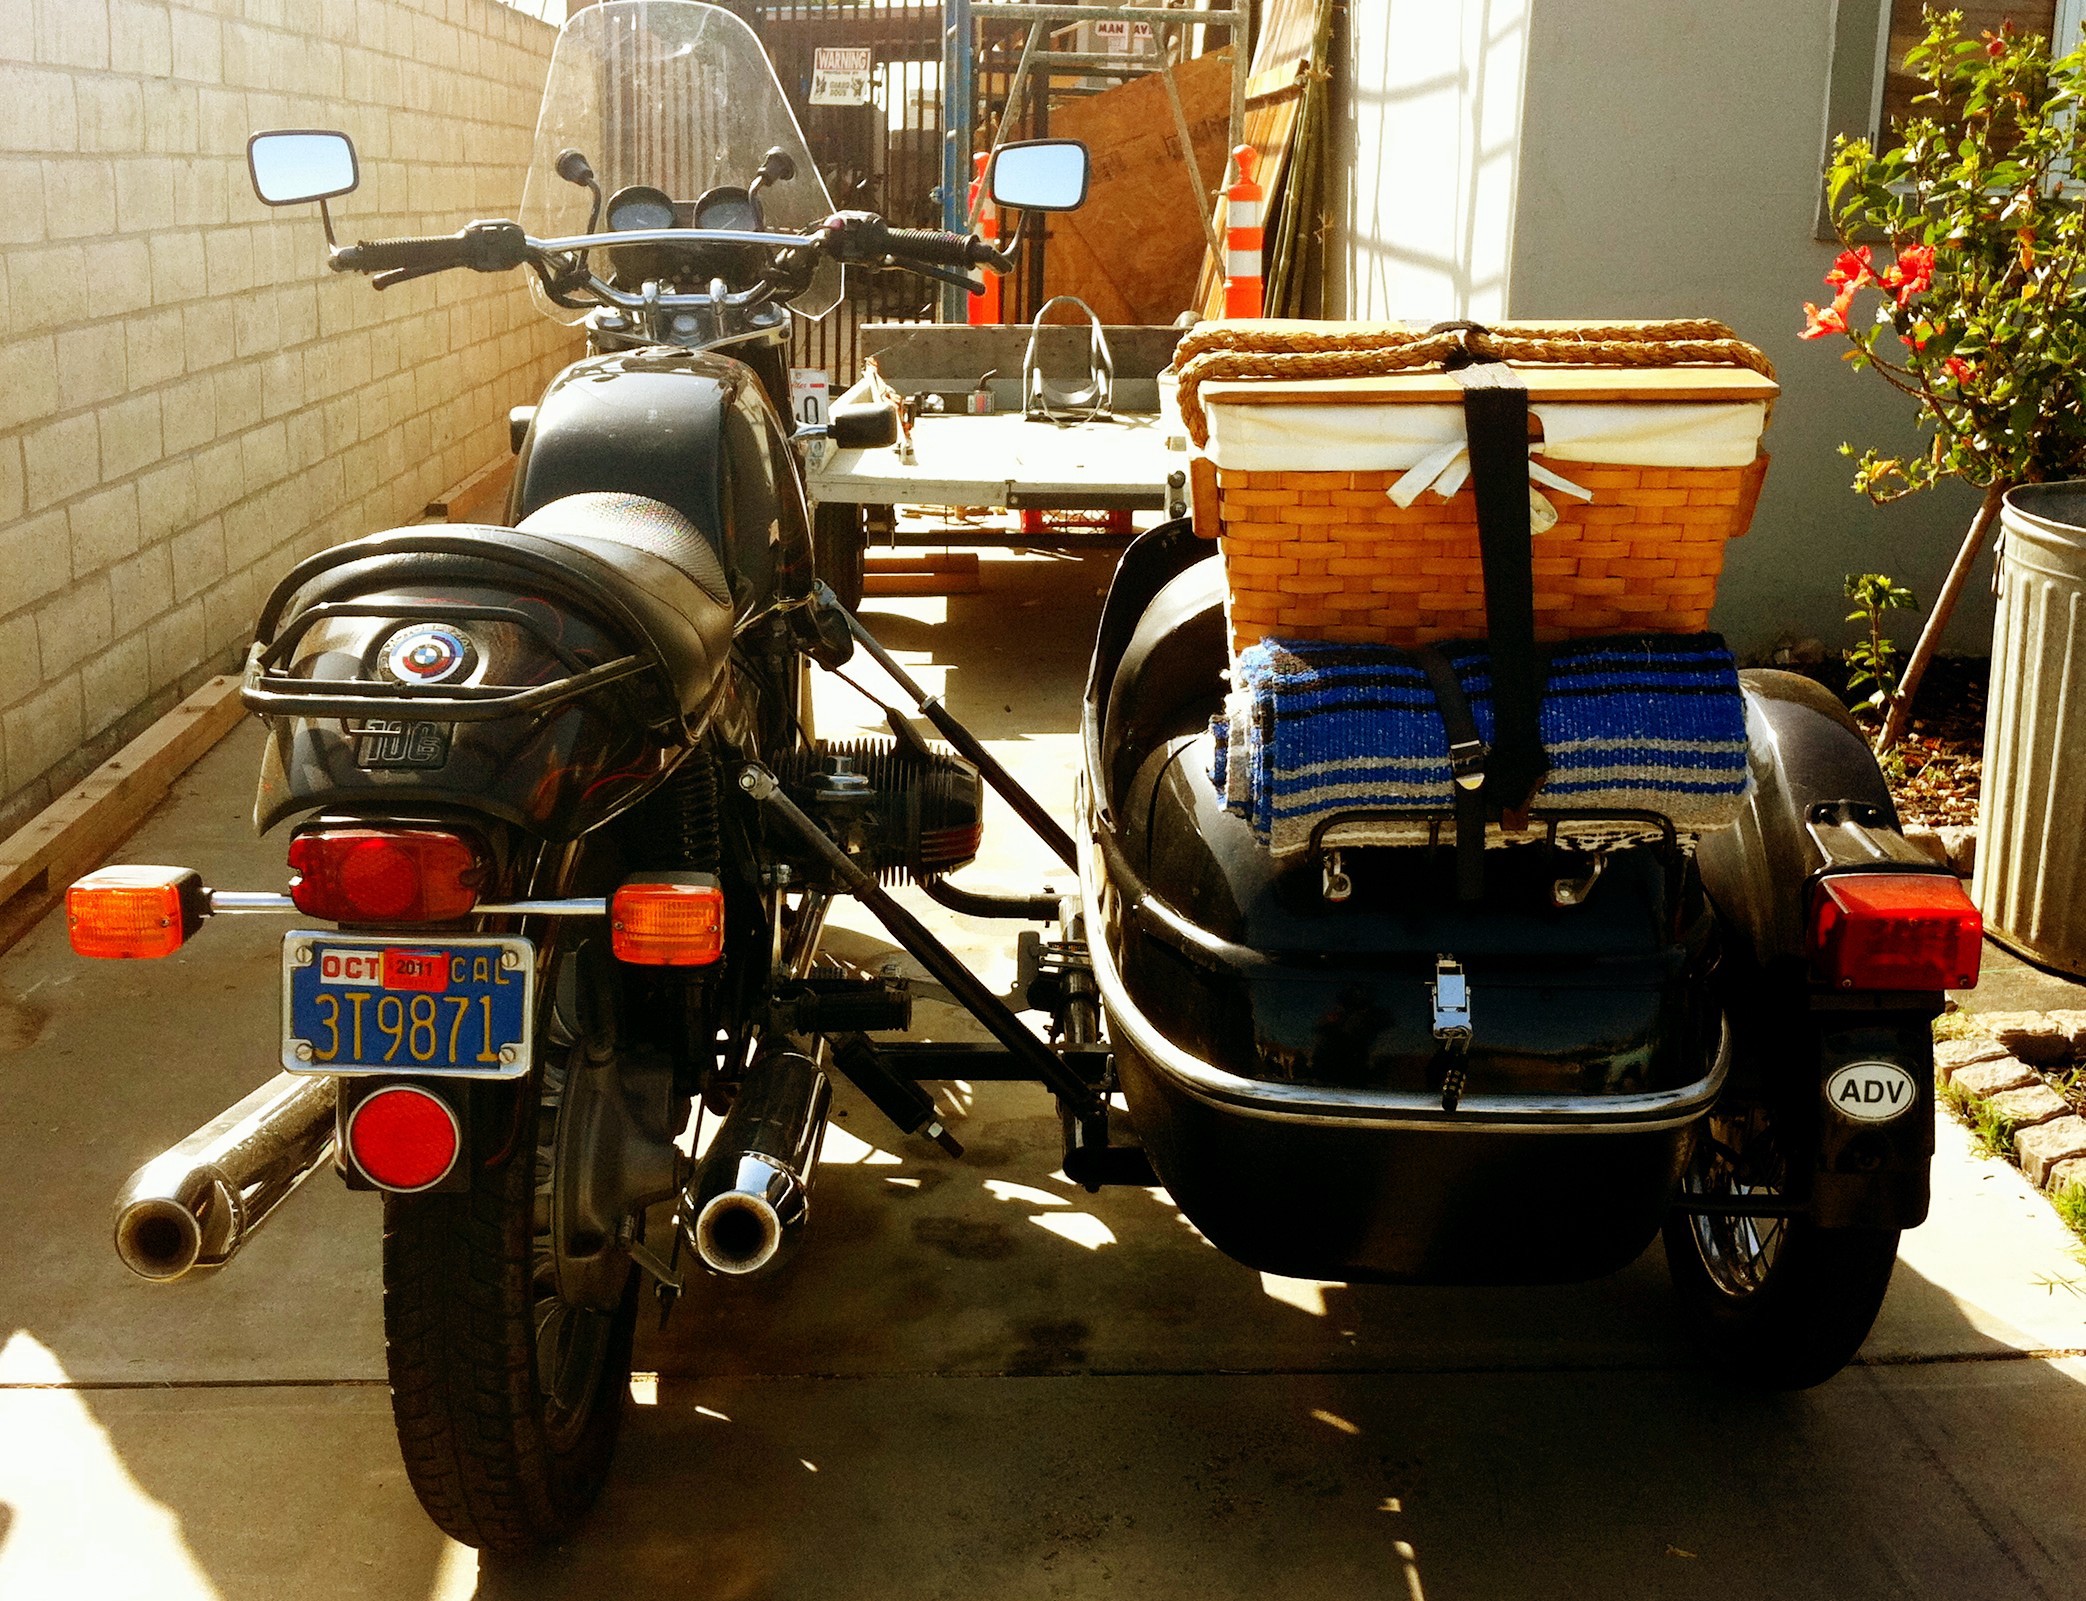 “Sidecar” by cireremarc is licensed under CC BY 2.0